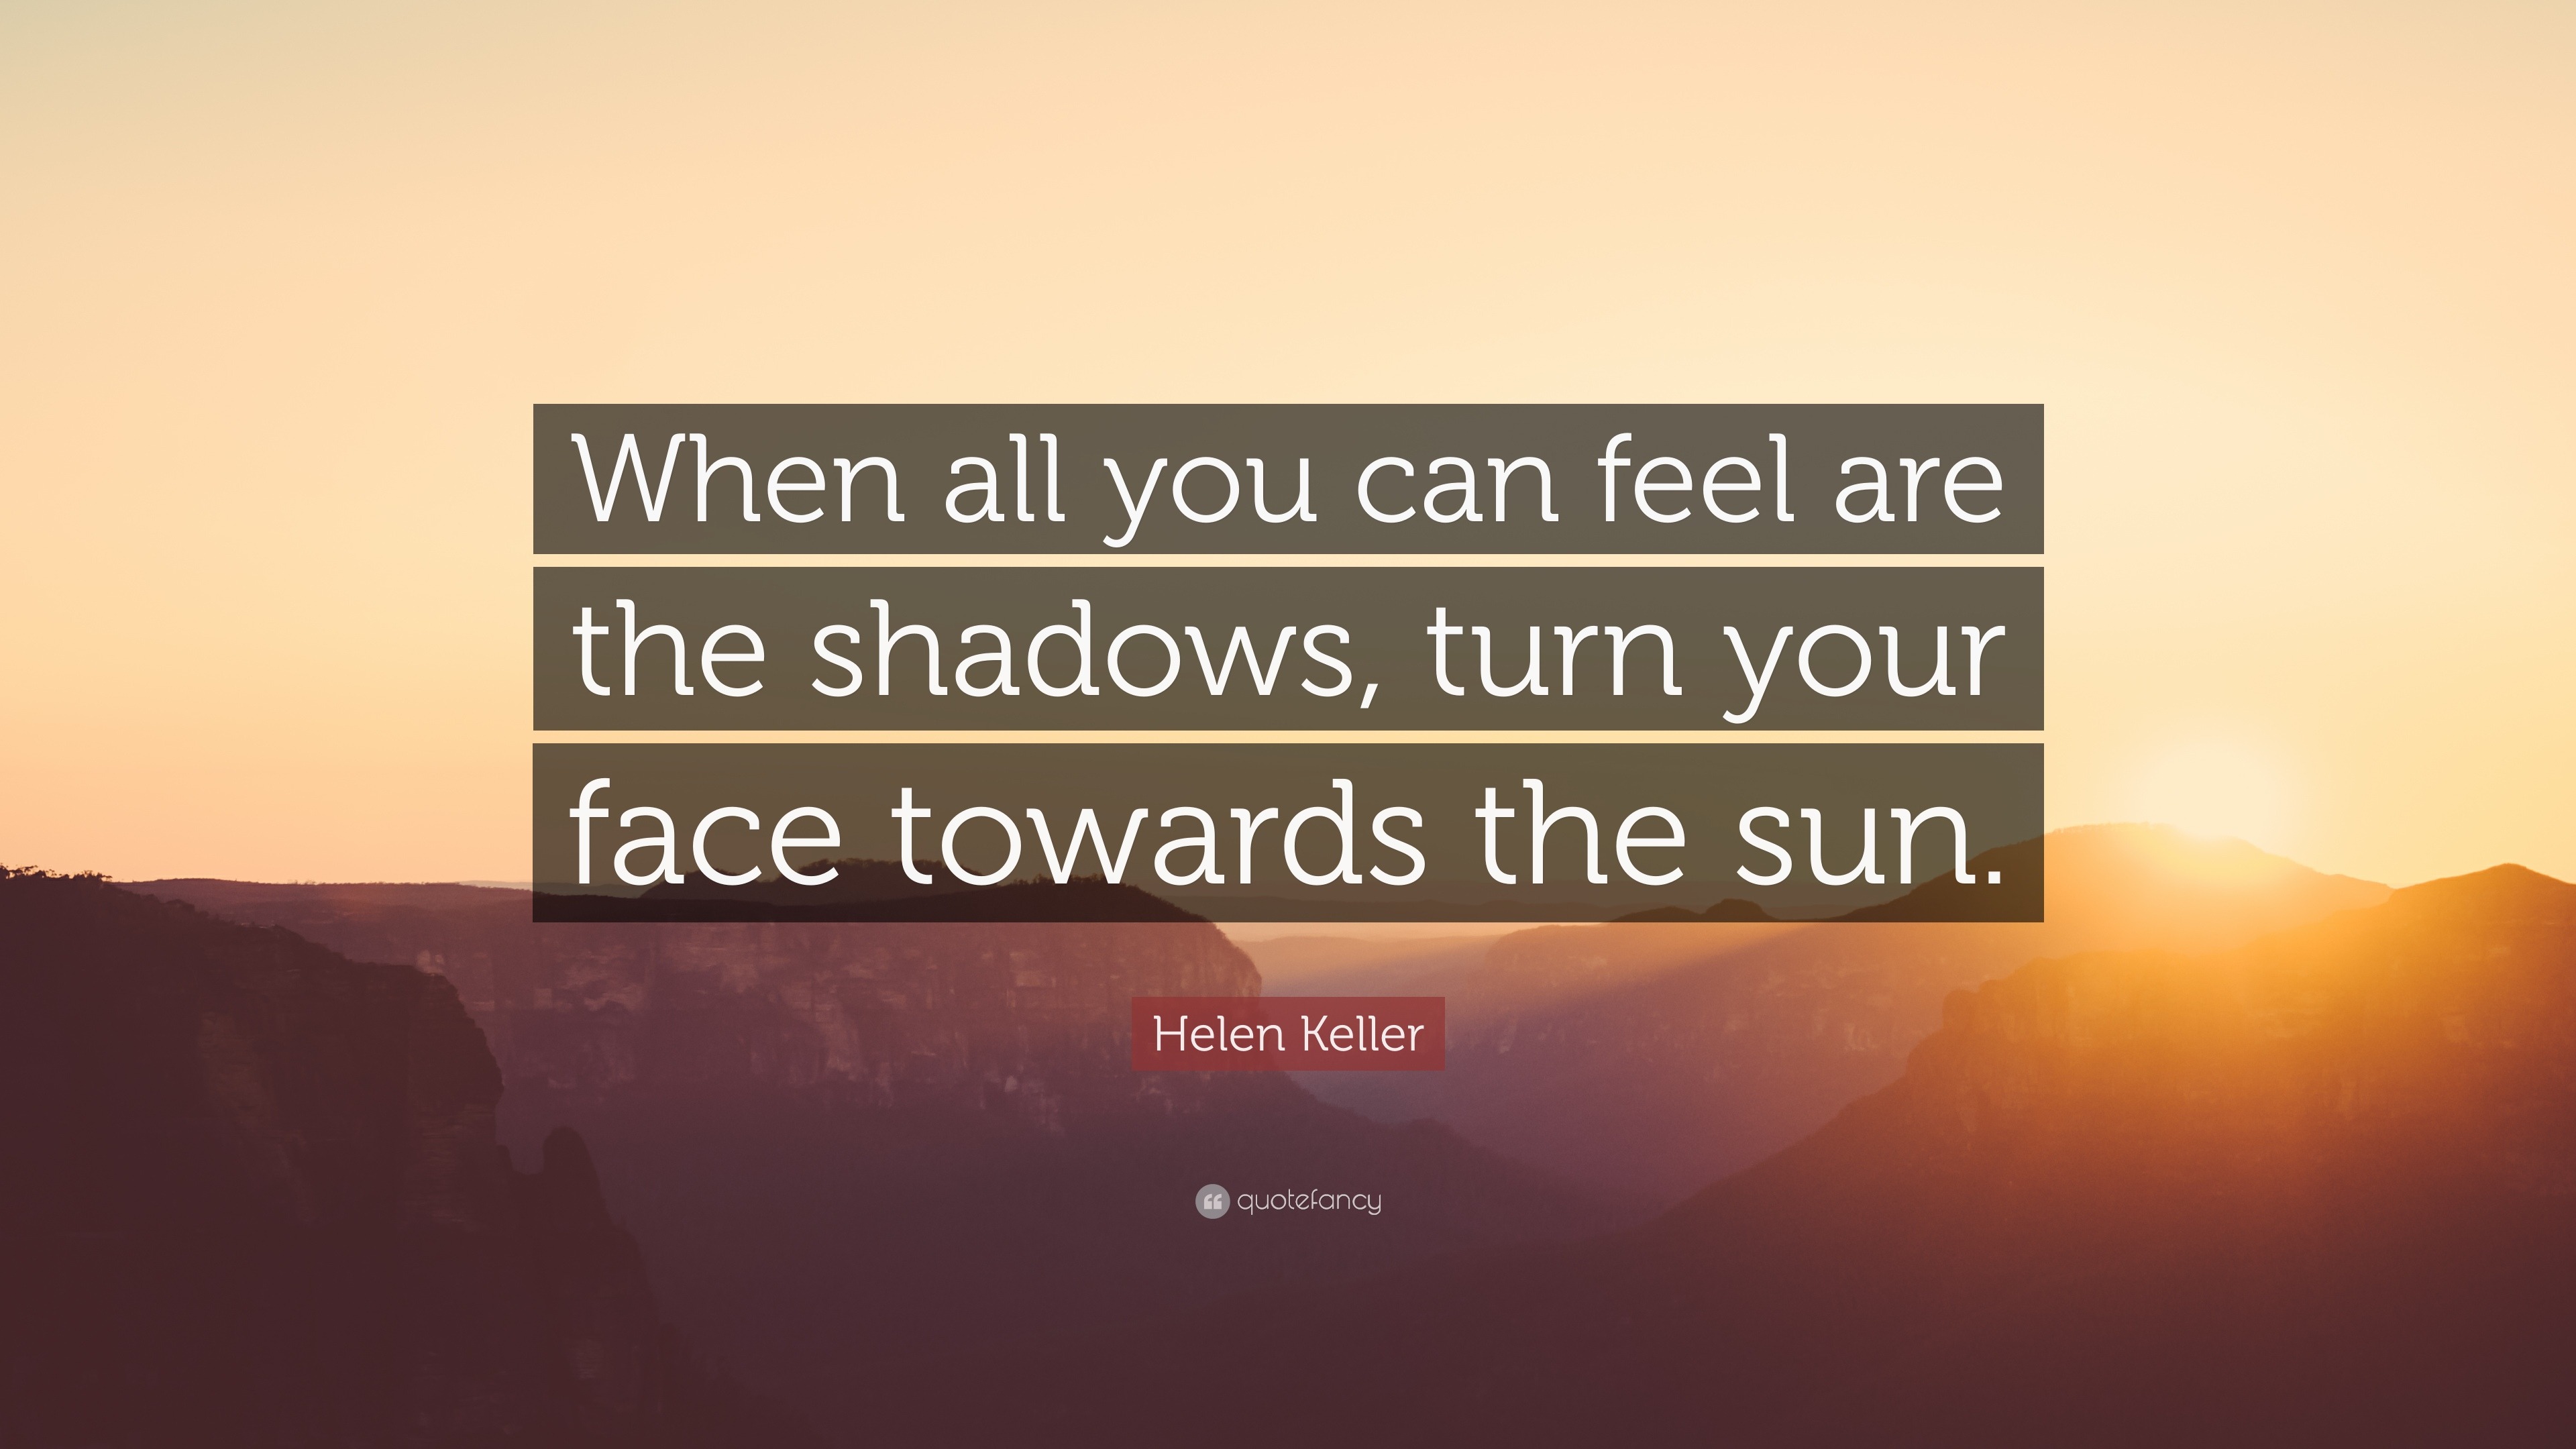 Helen Keller Quote When All You Can Feel Are The Shadows Turn Your Face Towards The